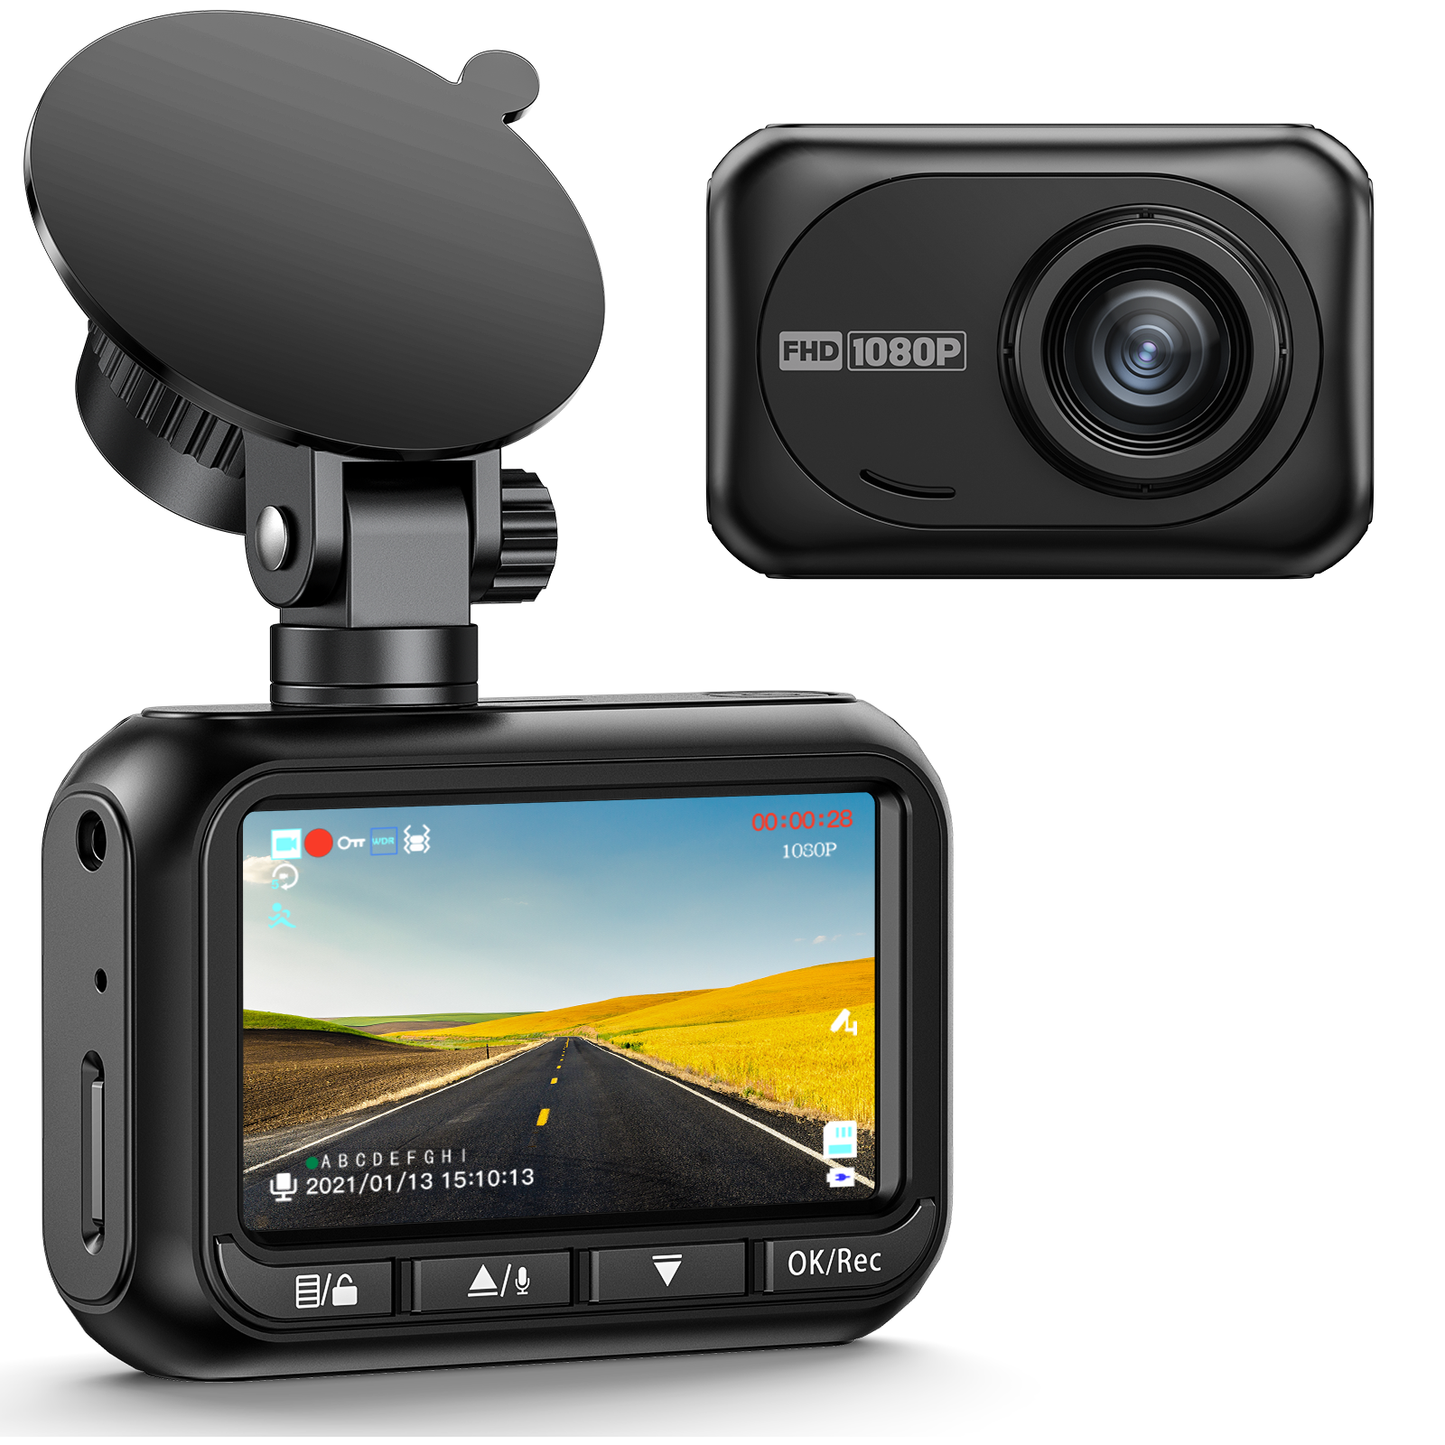 TOGUARD DC18 Front Dash Cam 1080P FHD 2.45" Car Camera 170° Wide Angle with Super Night Vision, WDR, G-Sensor, Loop Recording